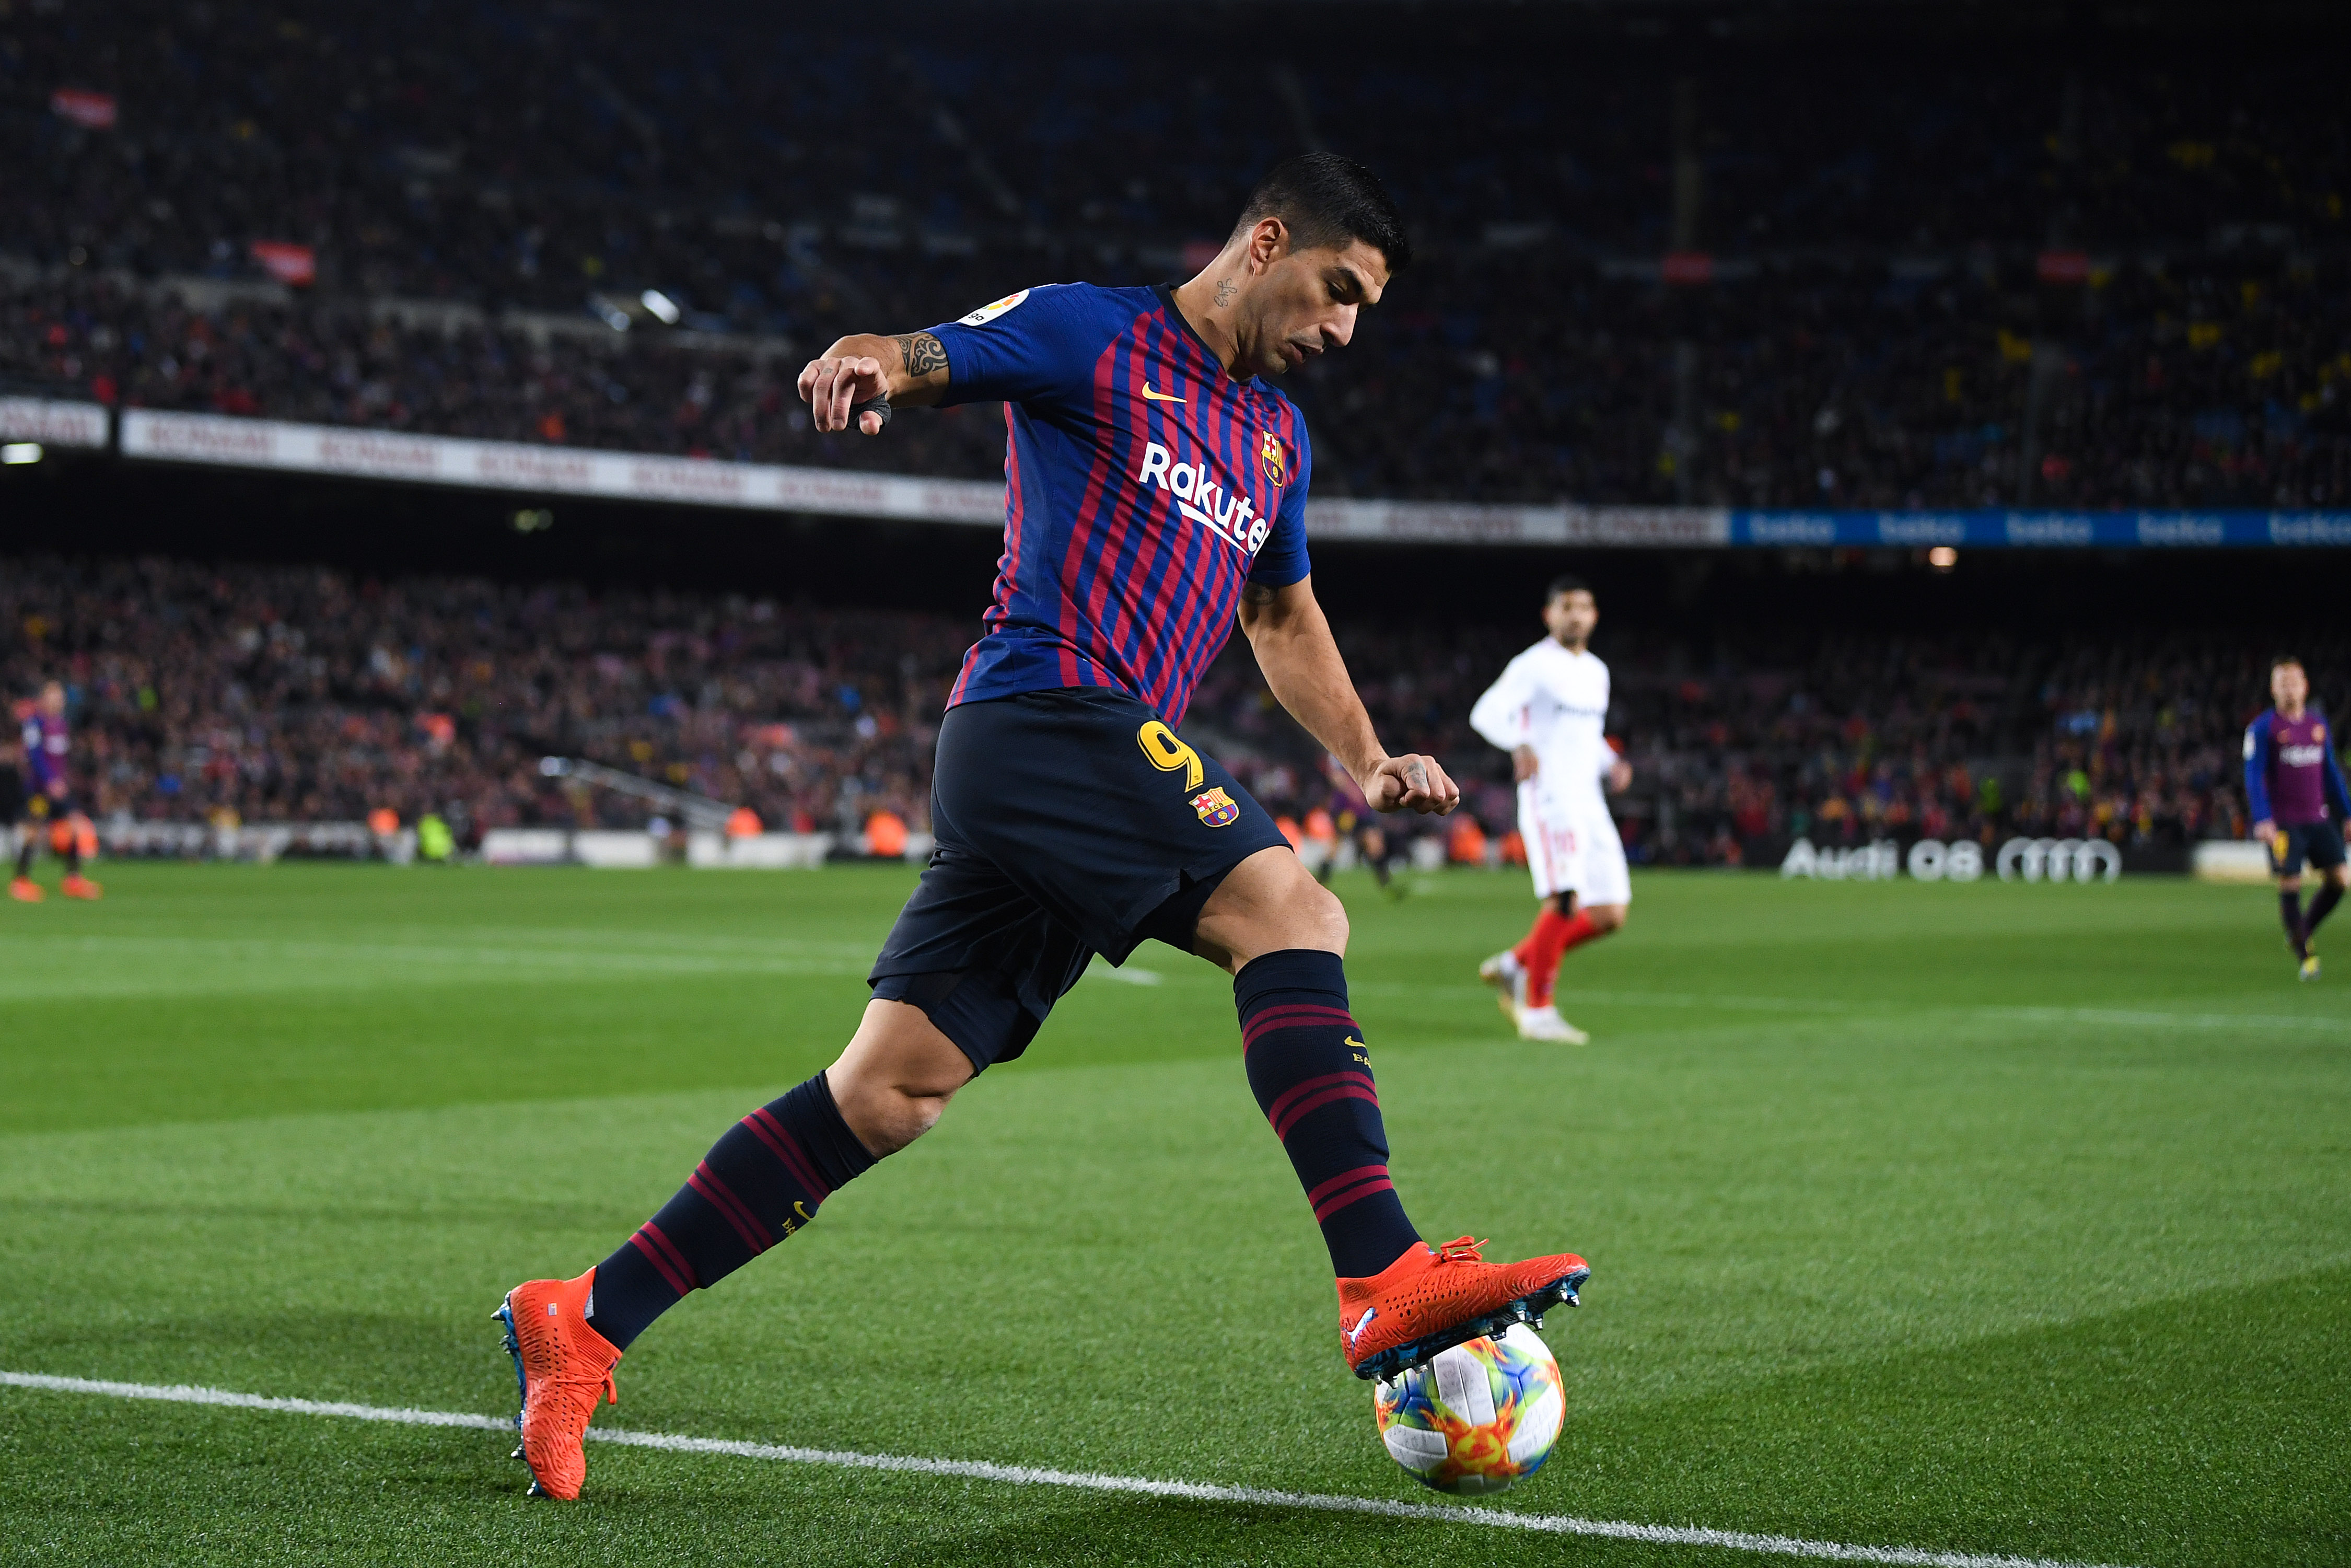 BARCELONA, SPAIN - JANUARY 30: Luis Suarez of FC Barcelona runs with the ball during the Copa del Quarter Final match between FC Barcelona and Sevilla FC at Nou Camp on January 30, 2019 in Barcelona, Spain. (Photo by David Ramos/Getty Images)